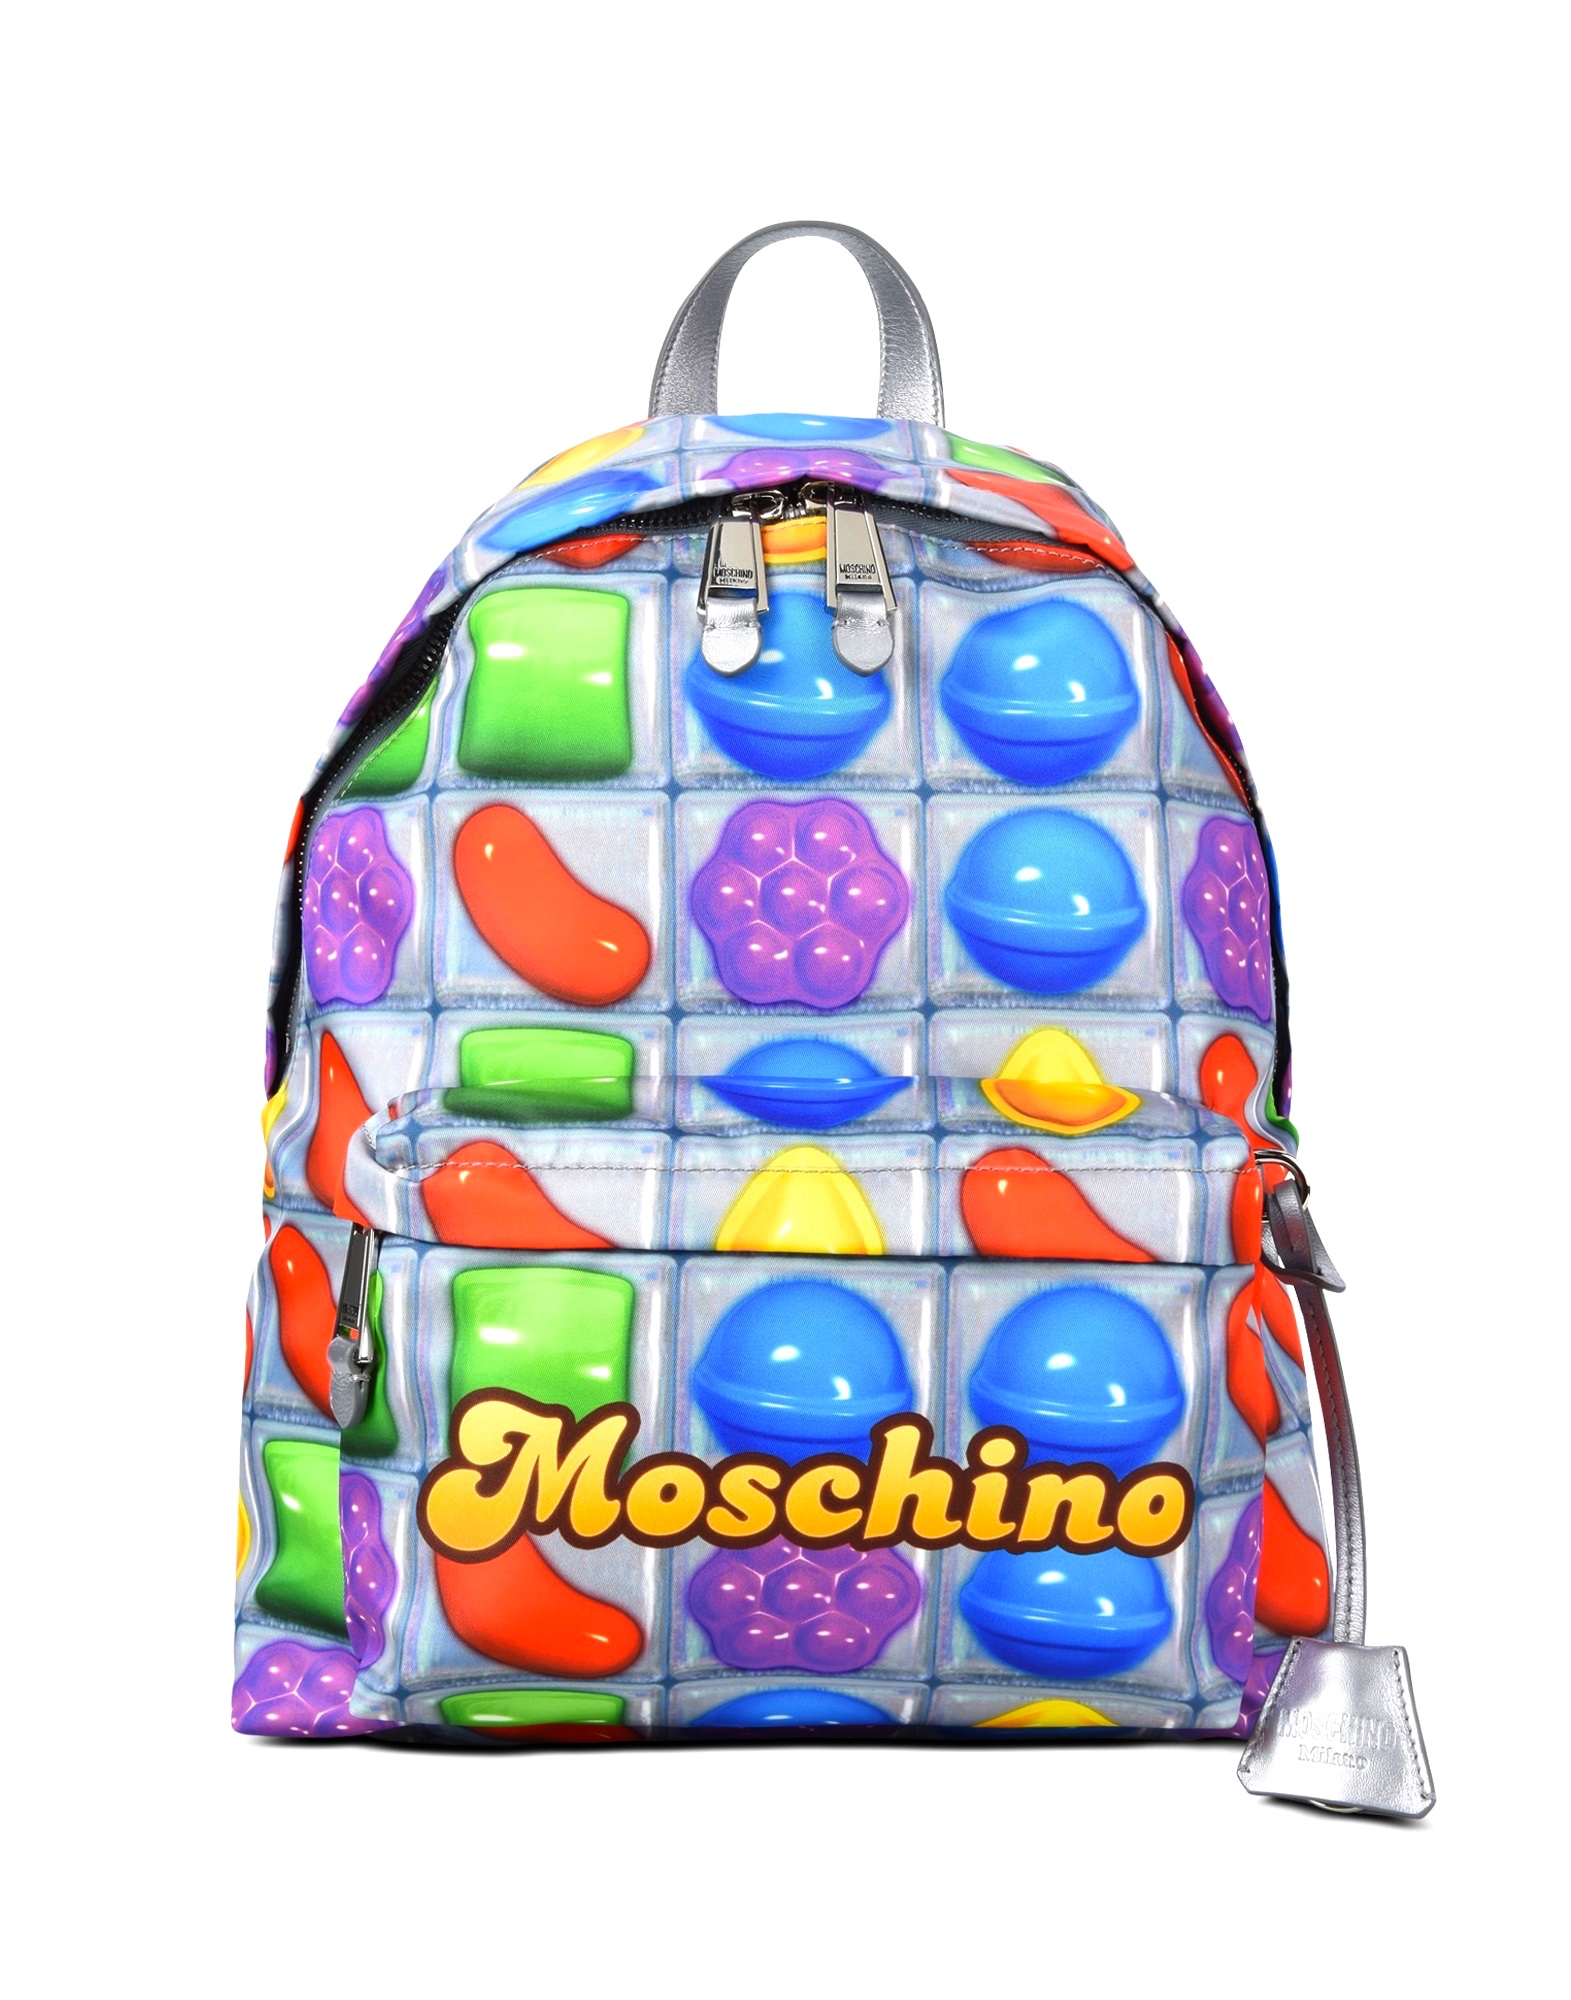 'Candy Crush' Will Be at Coachella and Is Getting Moschino-made Products